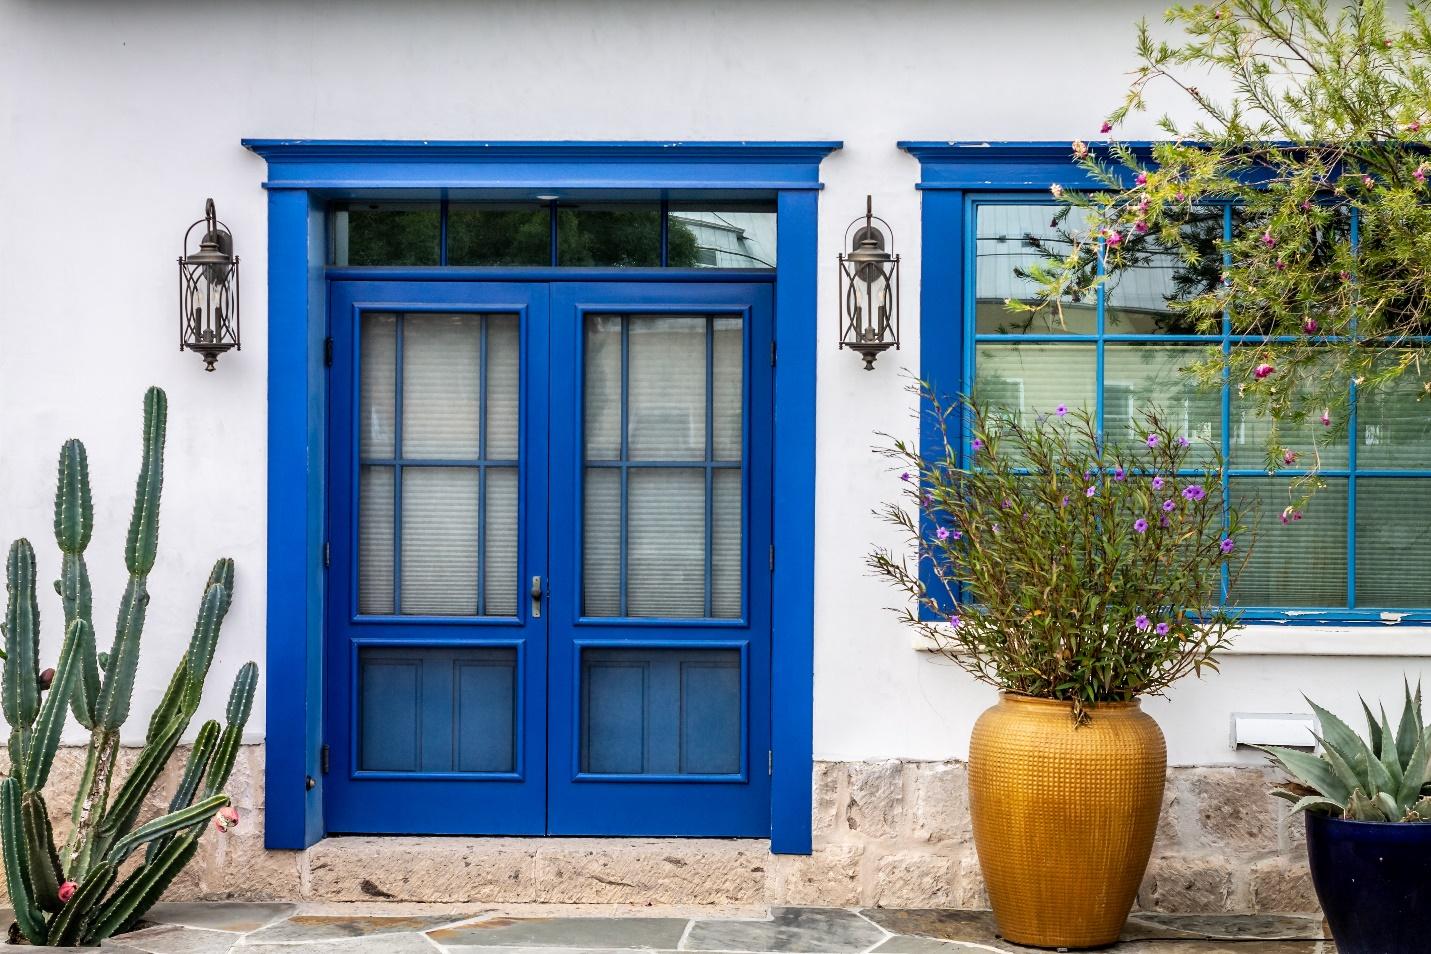 A blue door and window with plants in front of it

Description automatically generated